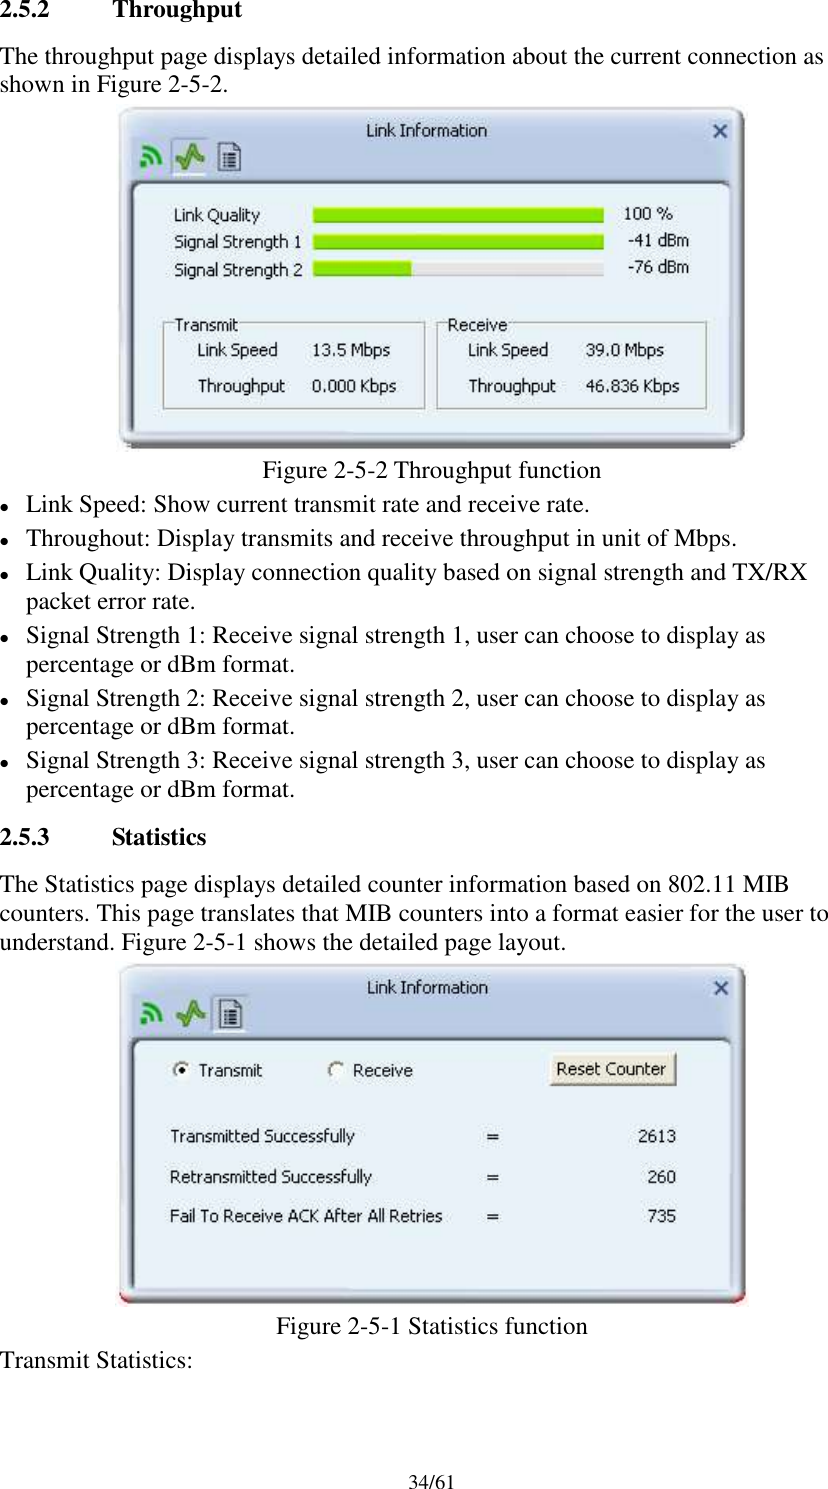 34/612.5.2 ThroughputThe throughput page displays detailed information about the current connection asshown in Figure 2-5-2.Figure 2-5-2 Throughput functionLink Speed: Show current transmit rate and receive rate.Throughout: Display transmits and receive throughput in unit of Mbps.Link Quality: Display connection quality based on signal strength and TX/RXpacket error rate.Signal Strength 1: Receive signal strength 1, user can choose to display aspercentage or dBm format.Signal Strength 2: Receive signal strength 2, user can choose to display aspercentage or dBm format.Signal Strength 3: Receive signal strength 3, user can choose to display aspercentage or dBm format.2.5.3 StatisticsThe Statistics page displays detailed counter information based on 802.11 MIBcounters. This page translates that MIB counters into a format easier for the user tounderstand. Figure 2-5-1 shows the detailed page layout.Figure 2-5-1 Statistics functionTransmit Statistics: